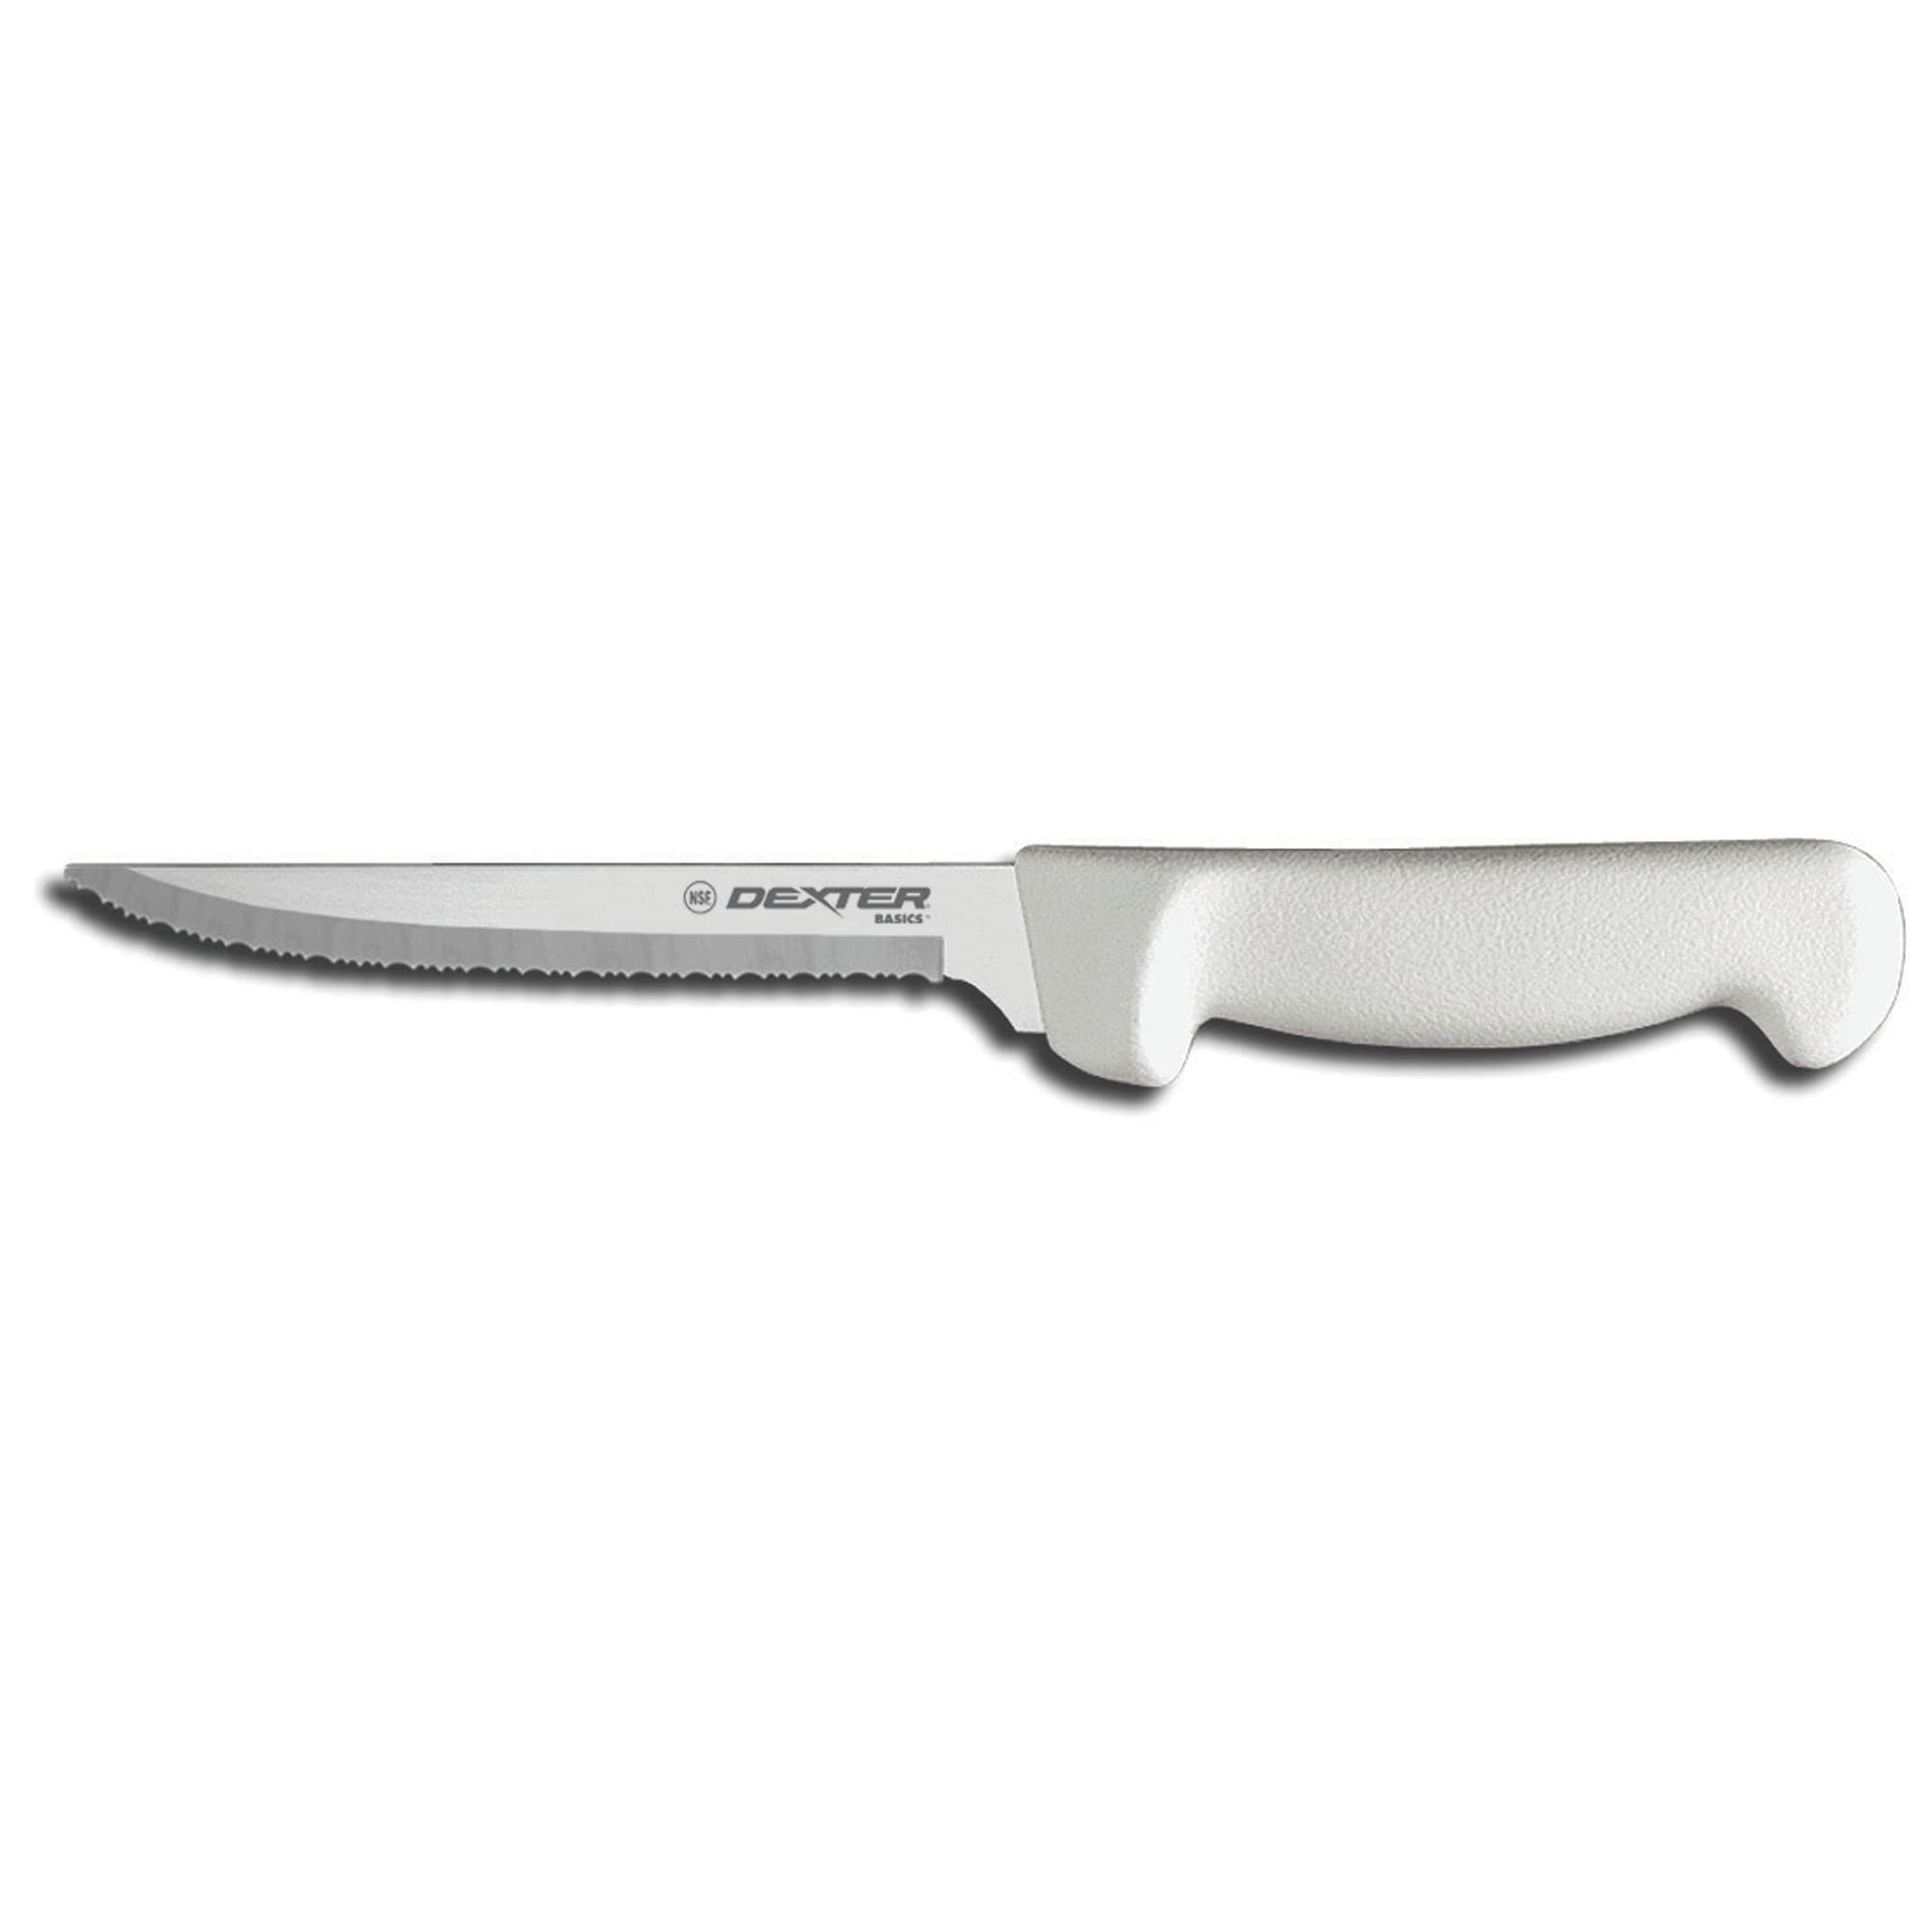 Dexter Russell P94847 Basics 6 Inch Utility Knife with White Handle